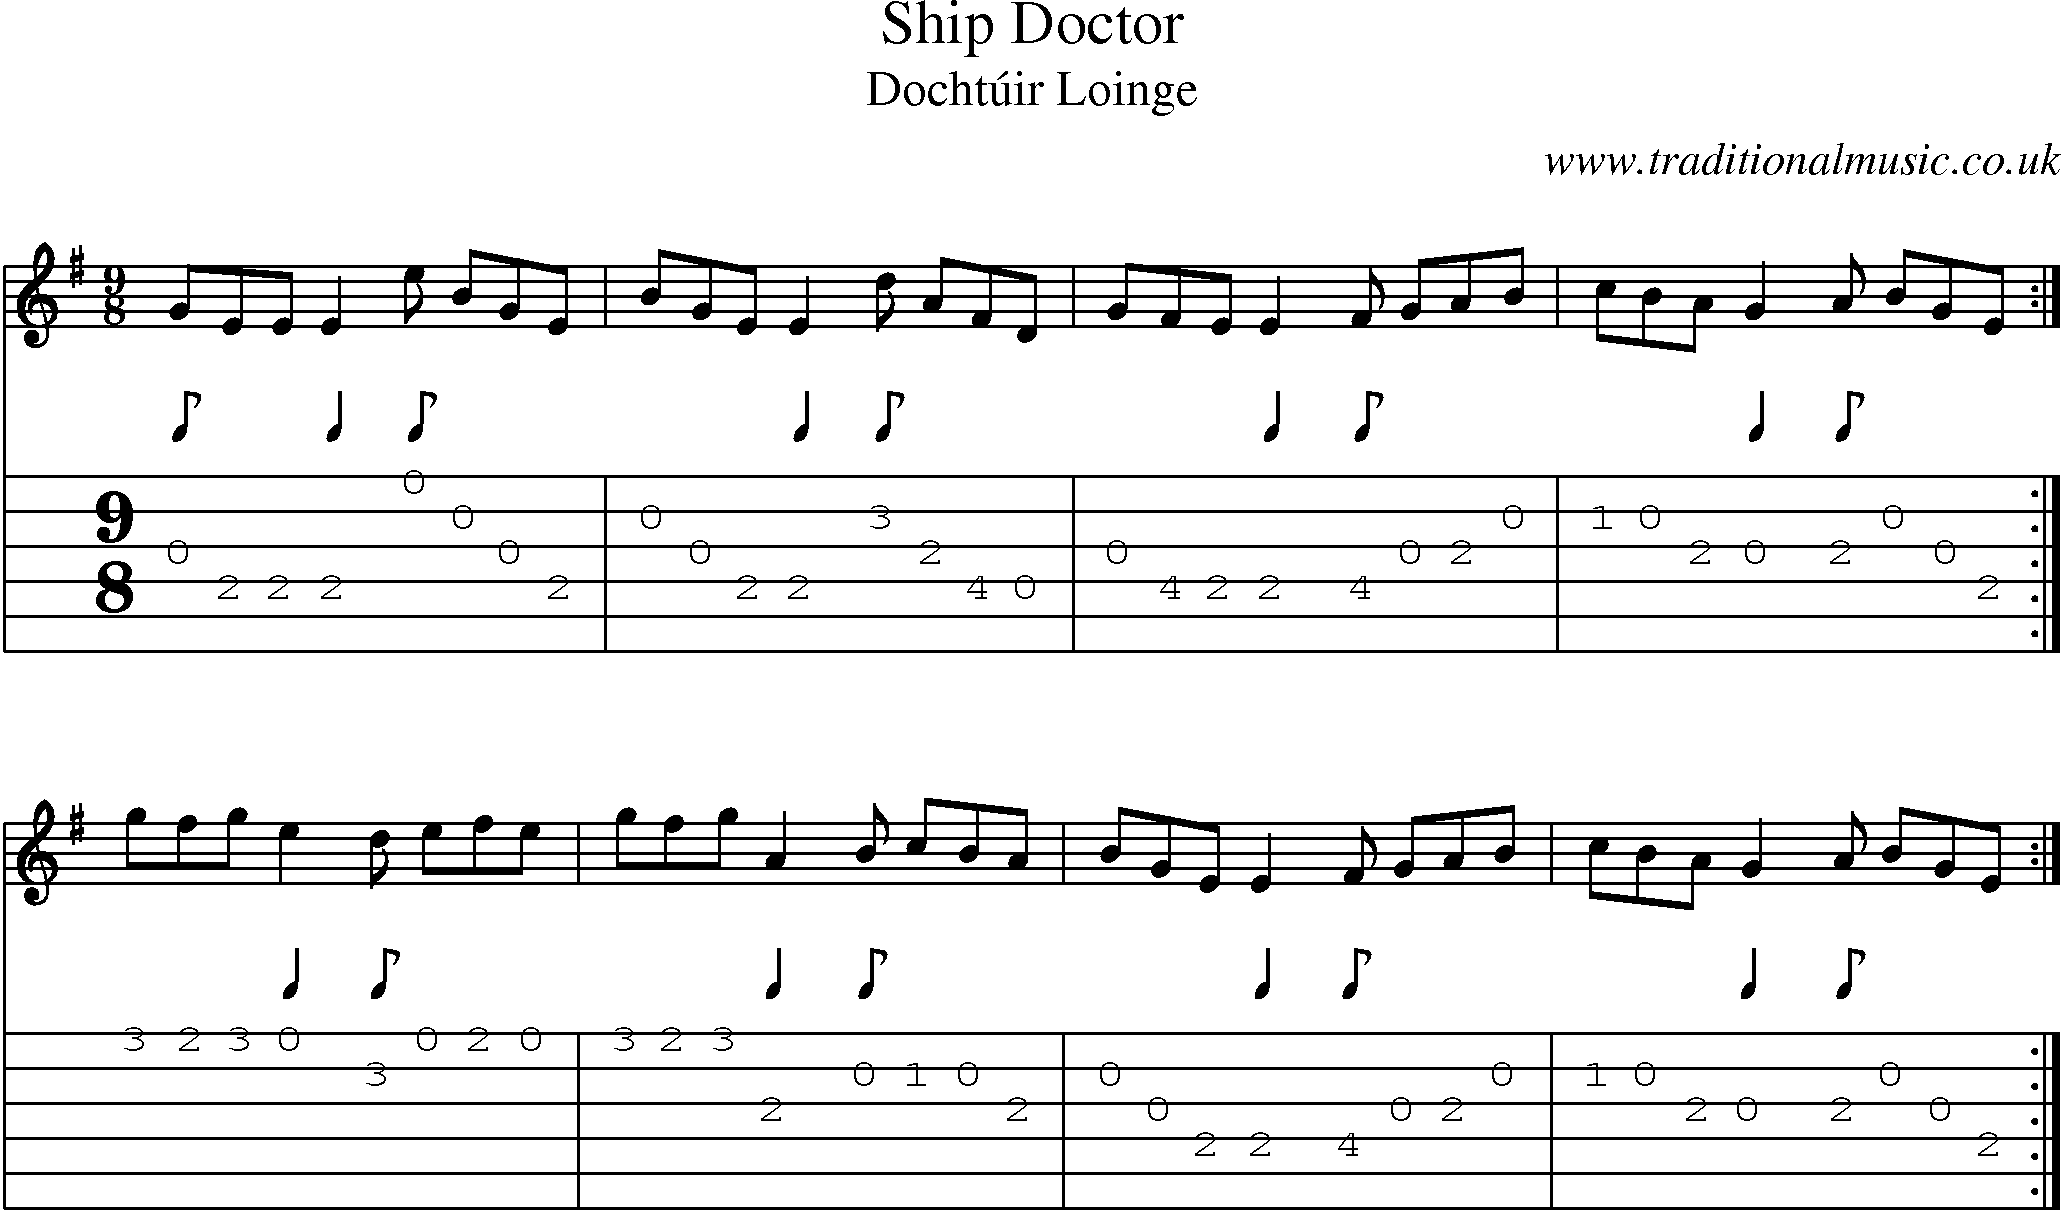 Music Score and Guitar Tabs for Ship Doctor